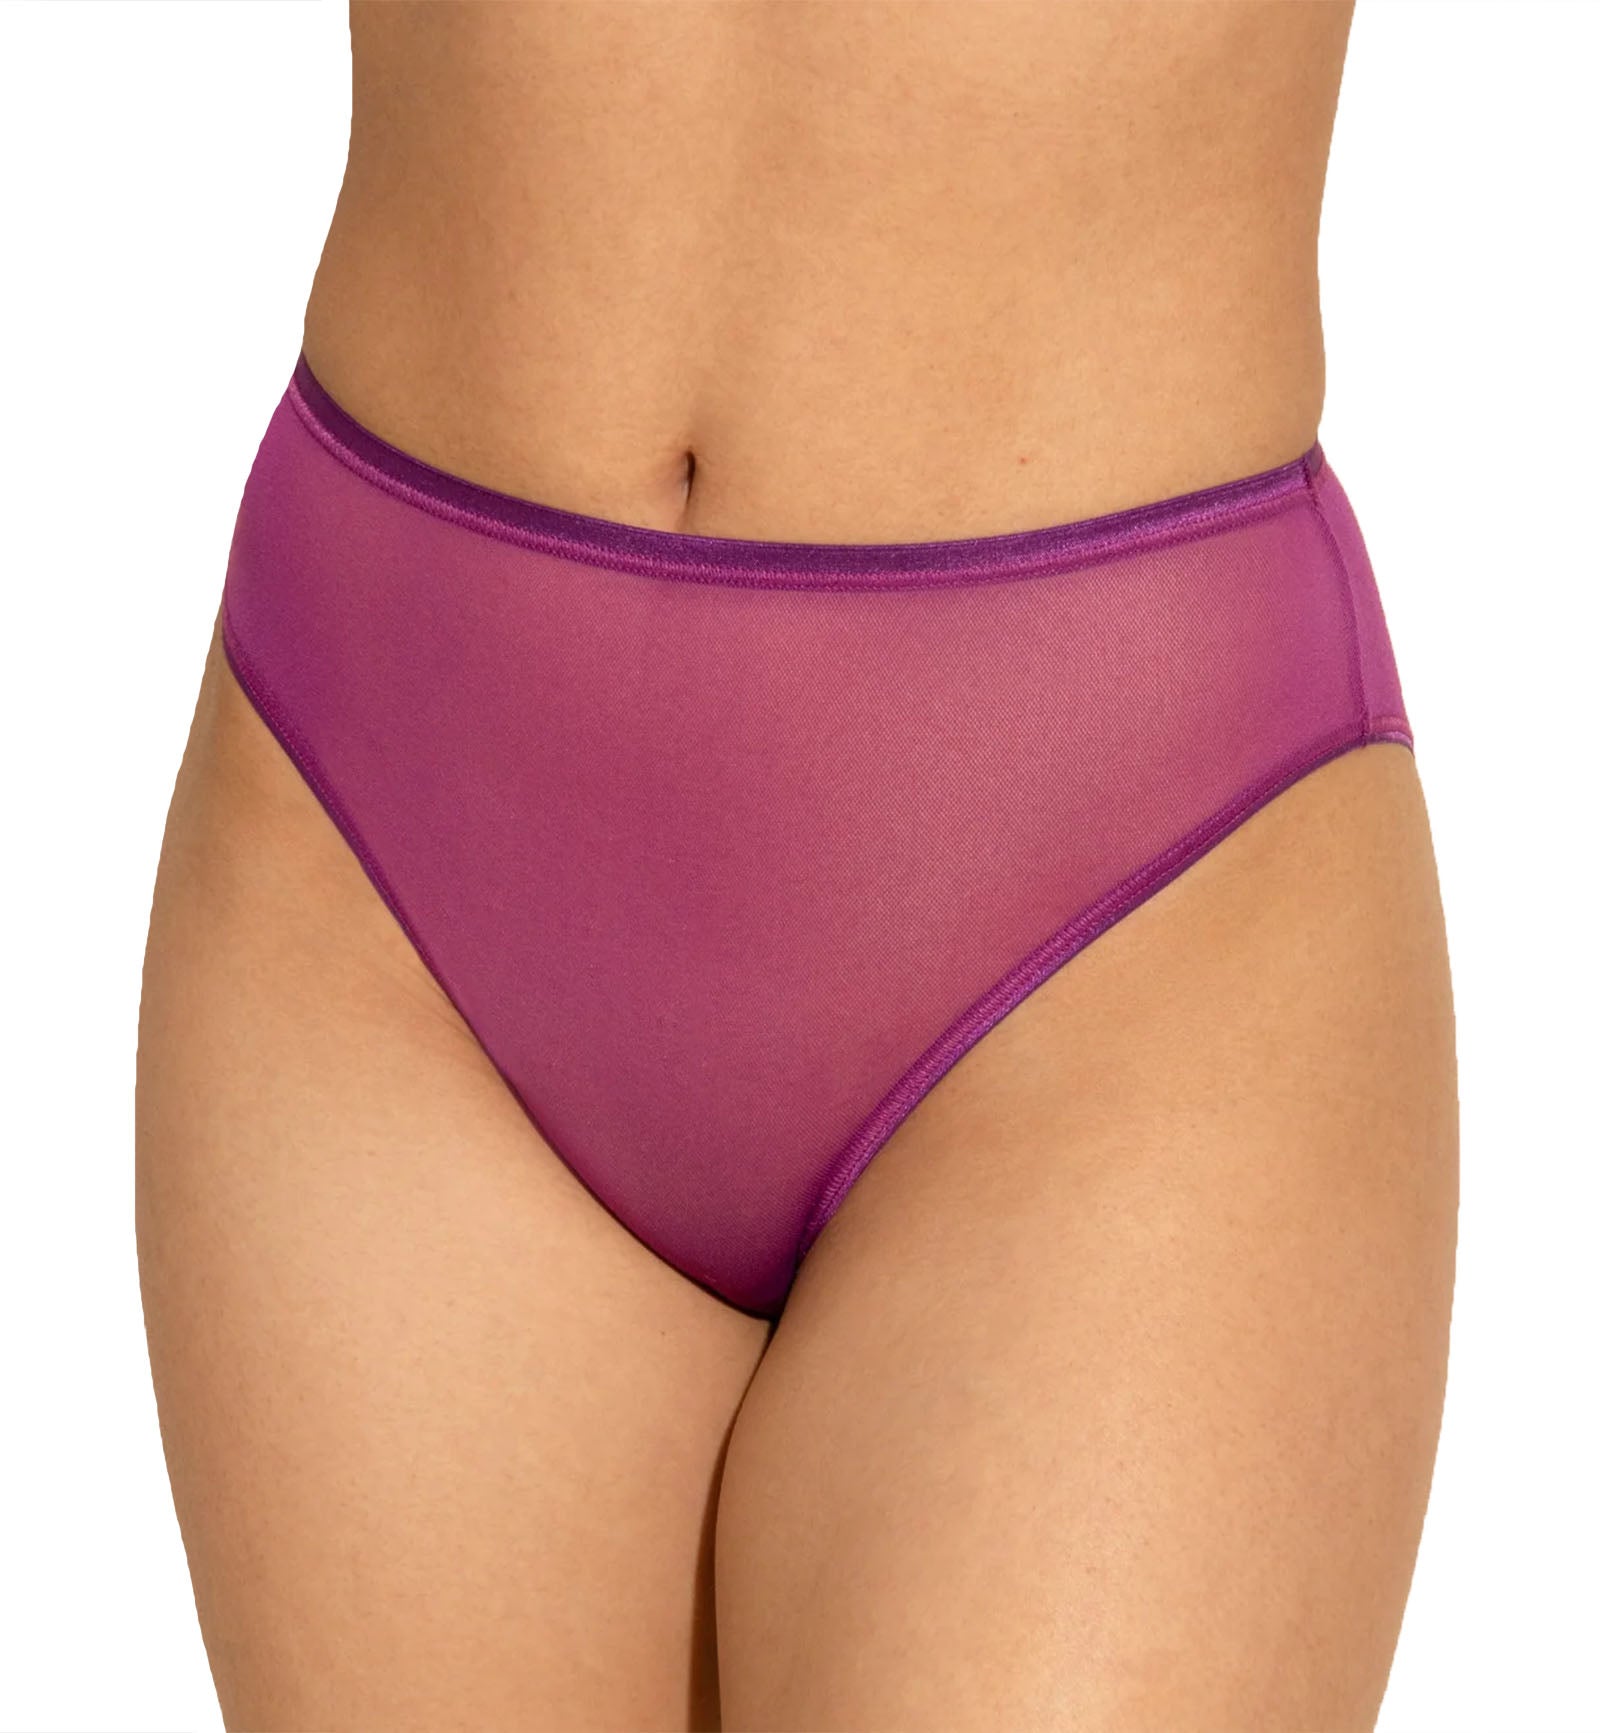 Cosabella Soire Confidence High Waist Brief Panty (SOIRC0562),Small,Swiss Beet - Swiss Beet,Small